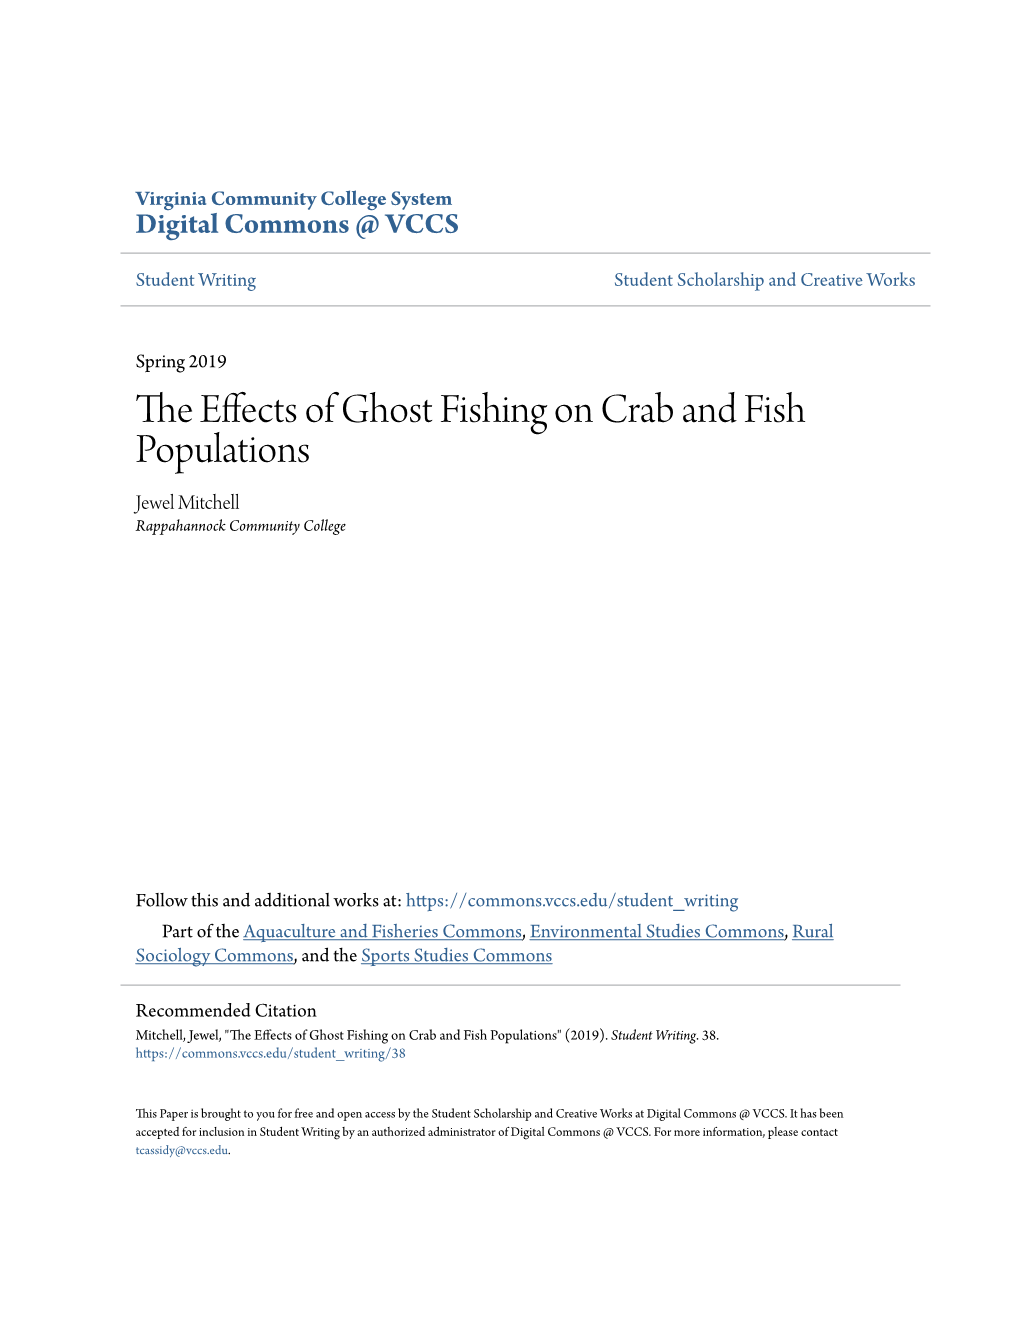 The Effects of Ghost Fishing on Crab and Fish Populations" (2019)